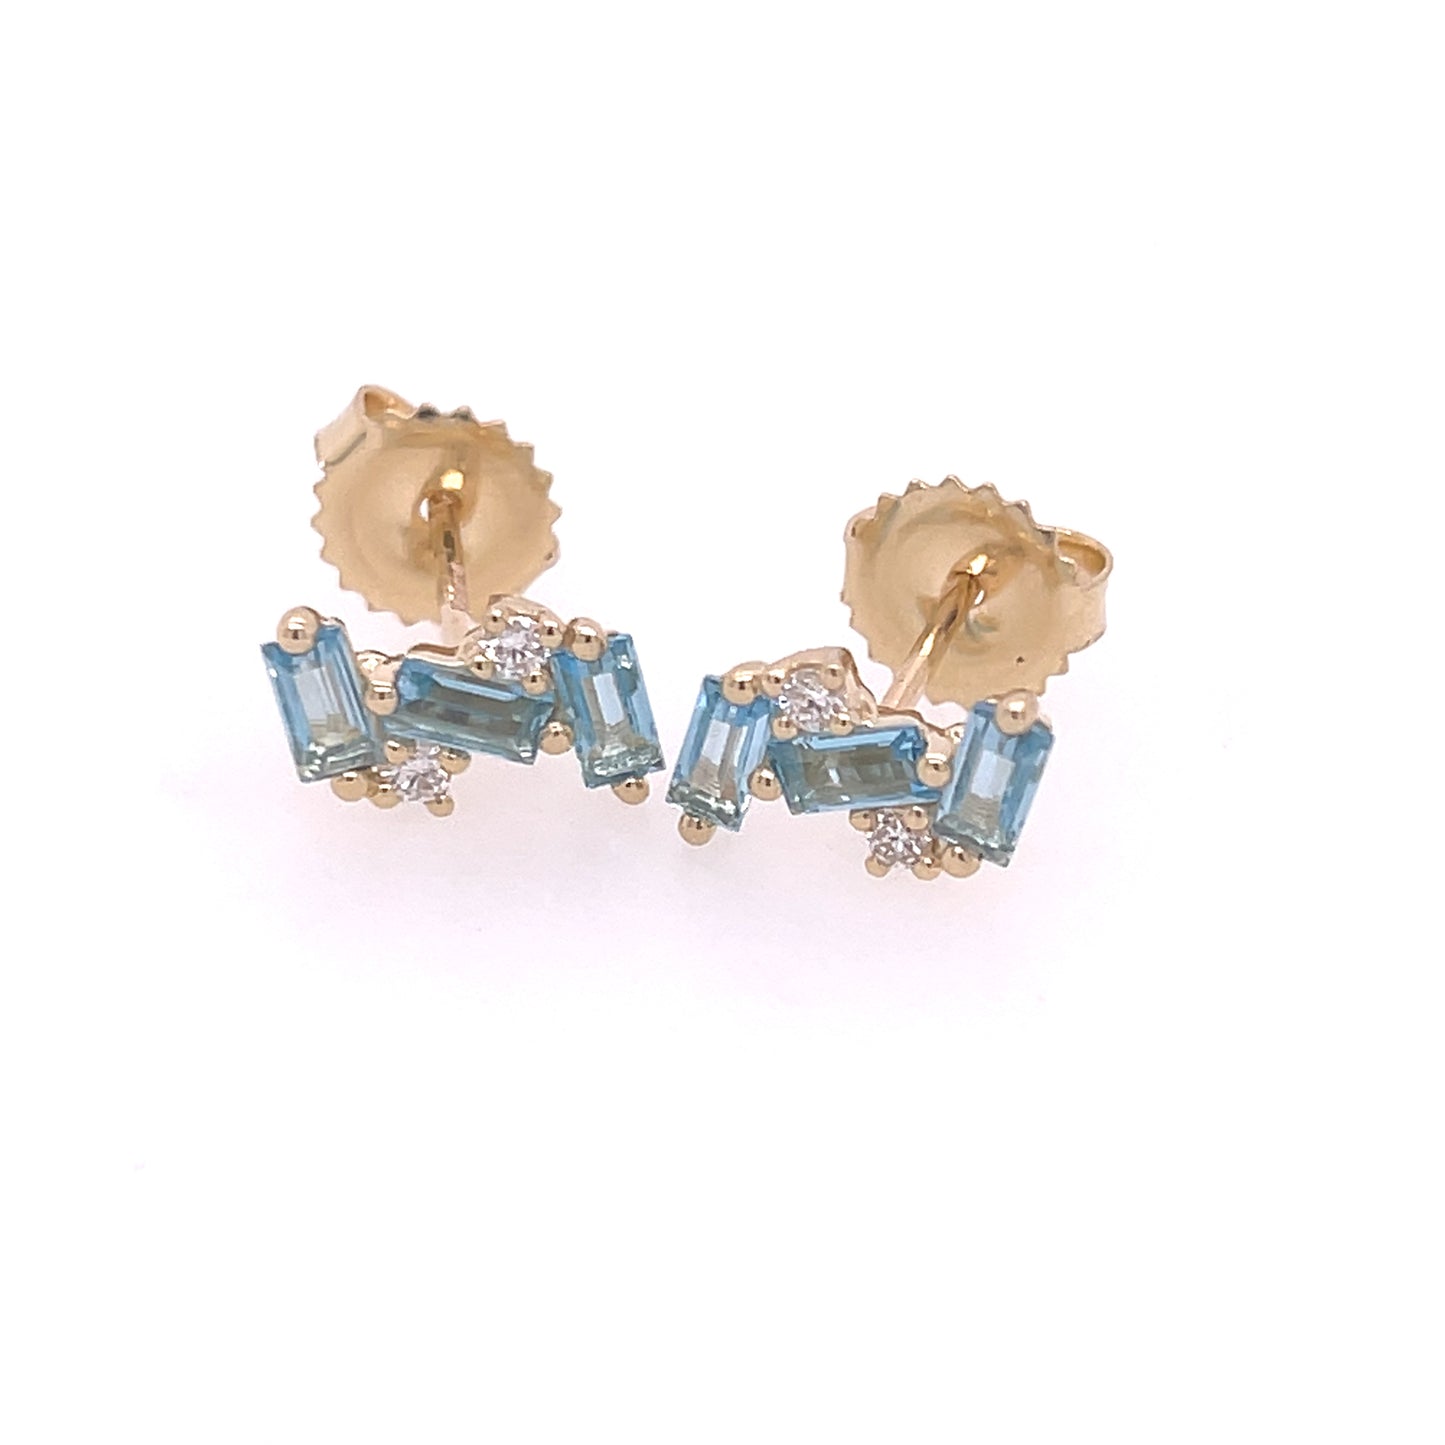 Triple Baguette Stud Earrings with Diamond Accents - Pair